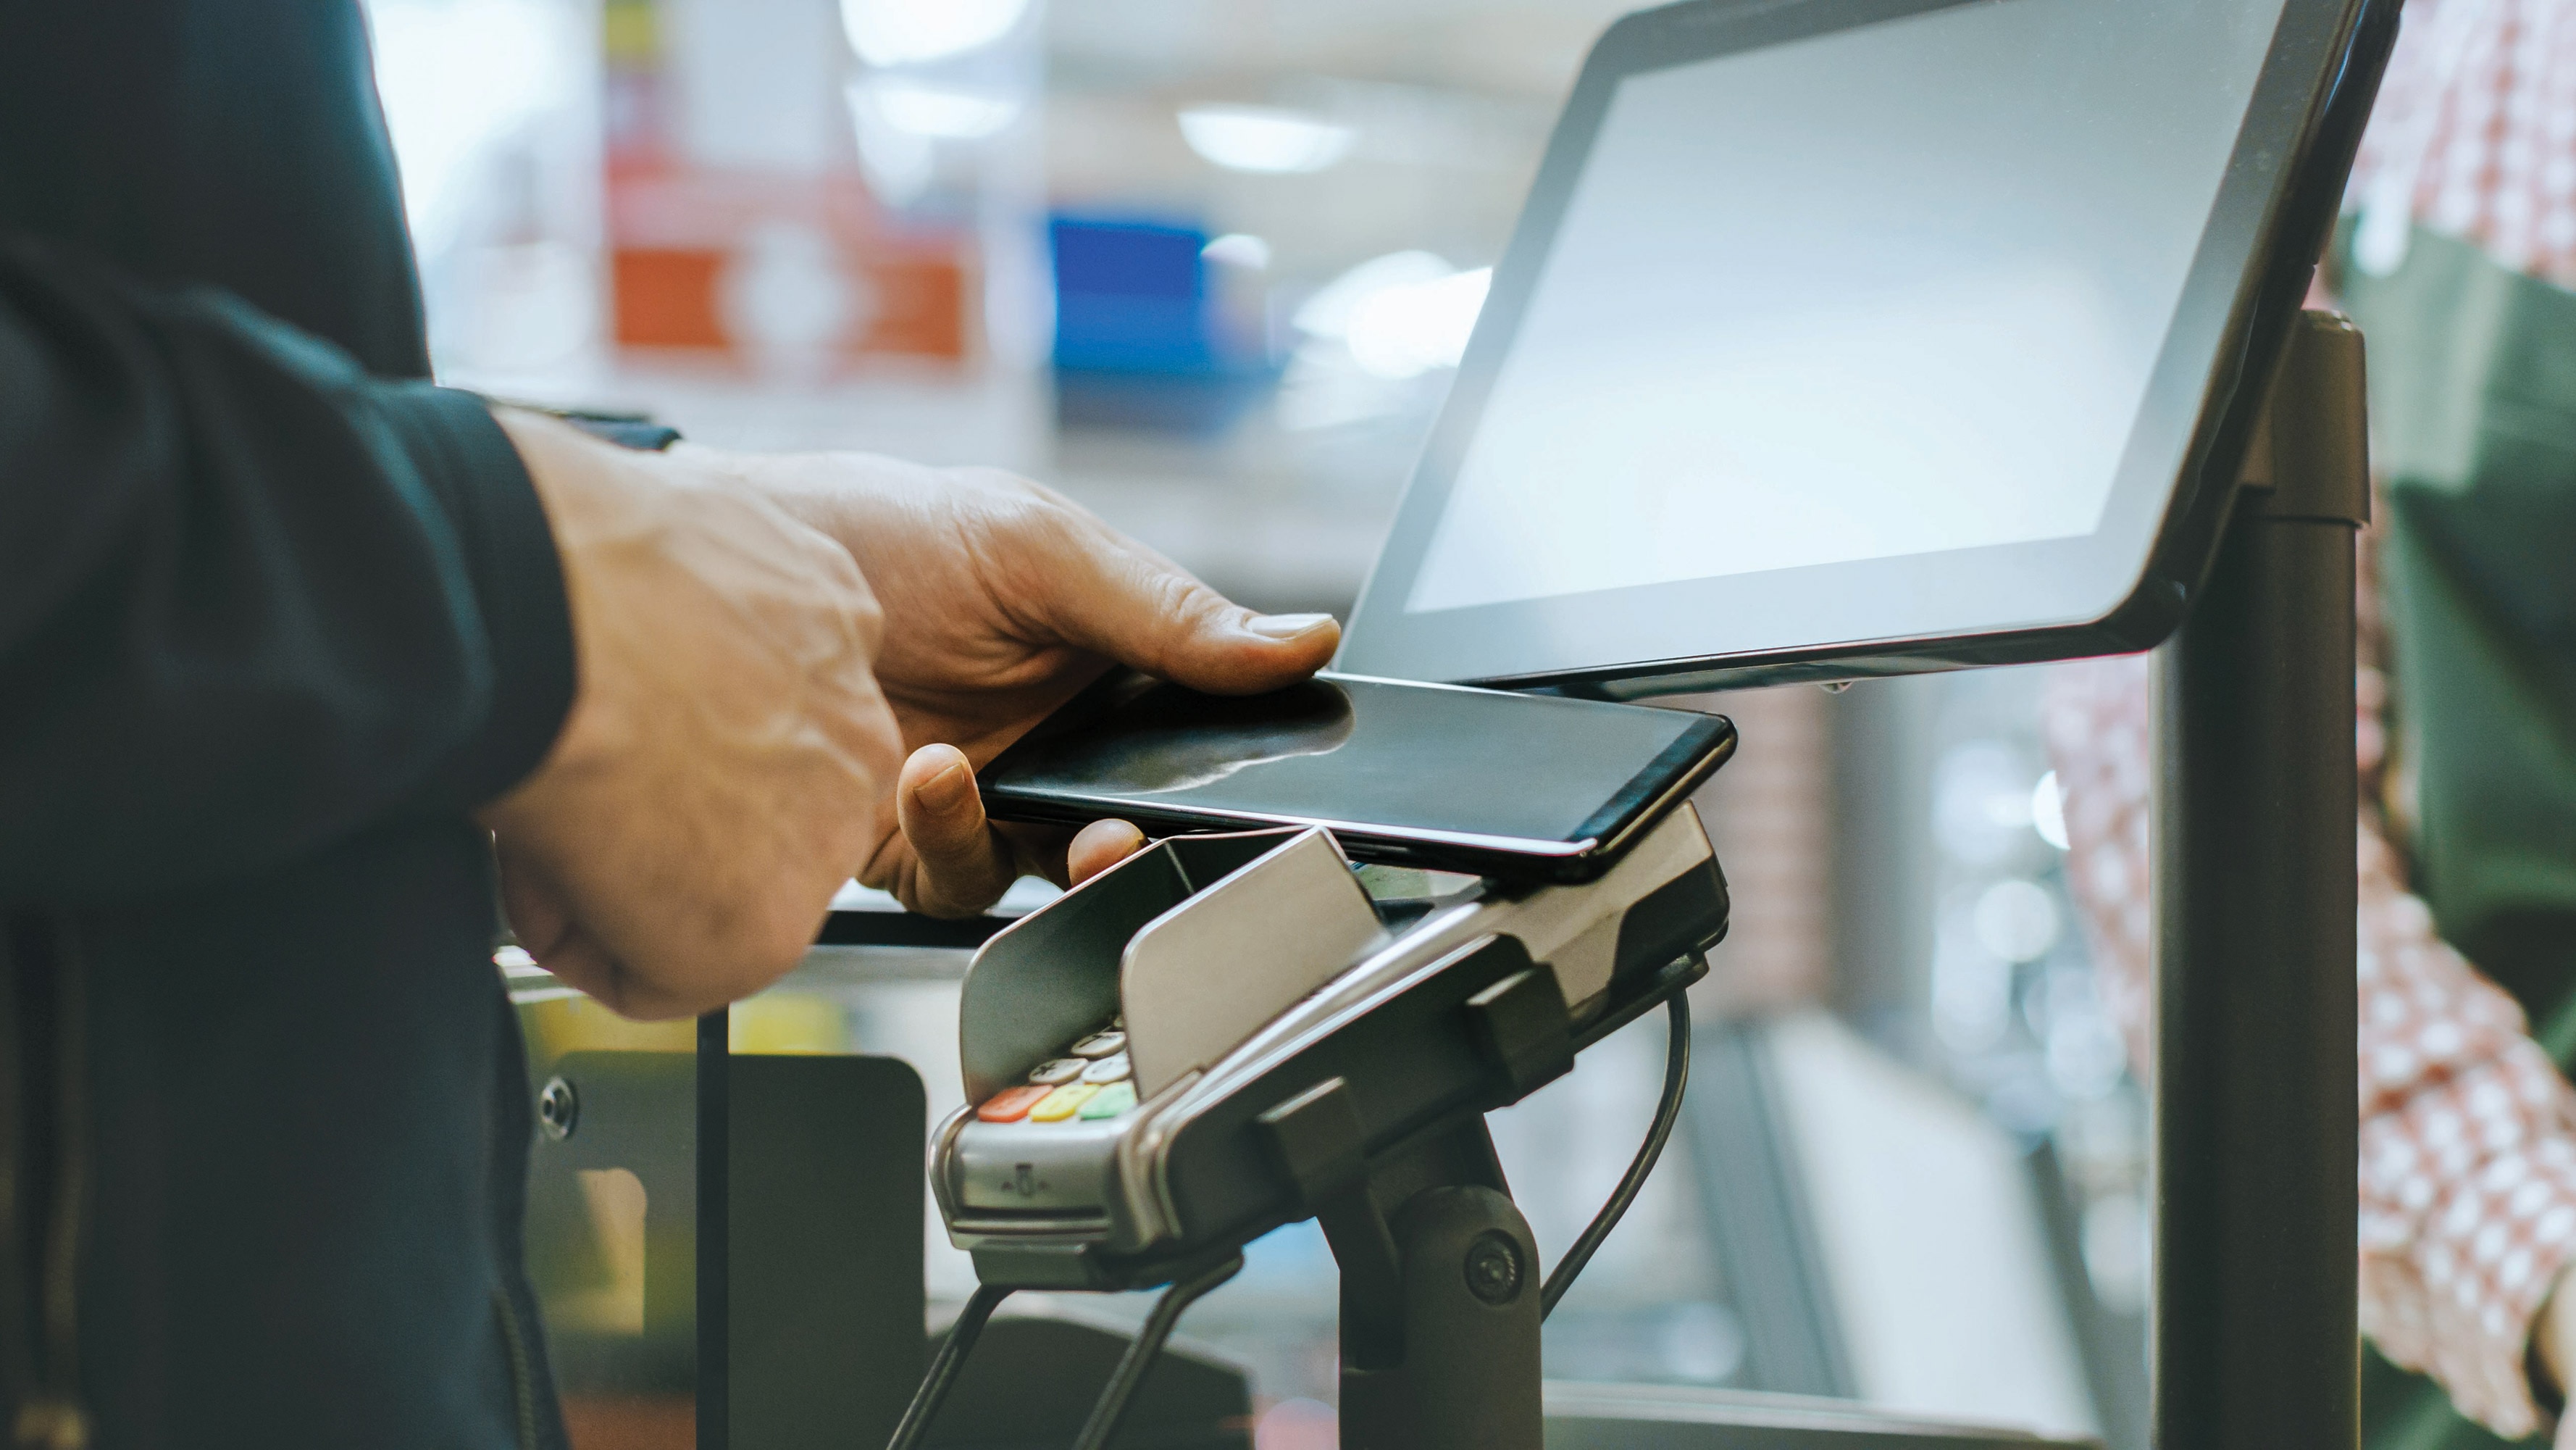 A person waves their smartphone over a credit card payment terminal to make a mobile payment at a checkout counter inside of a CVS Pharmacy store.